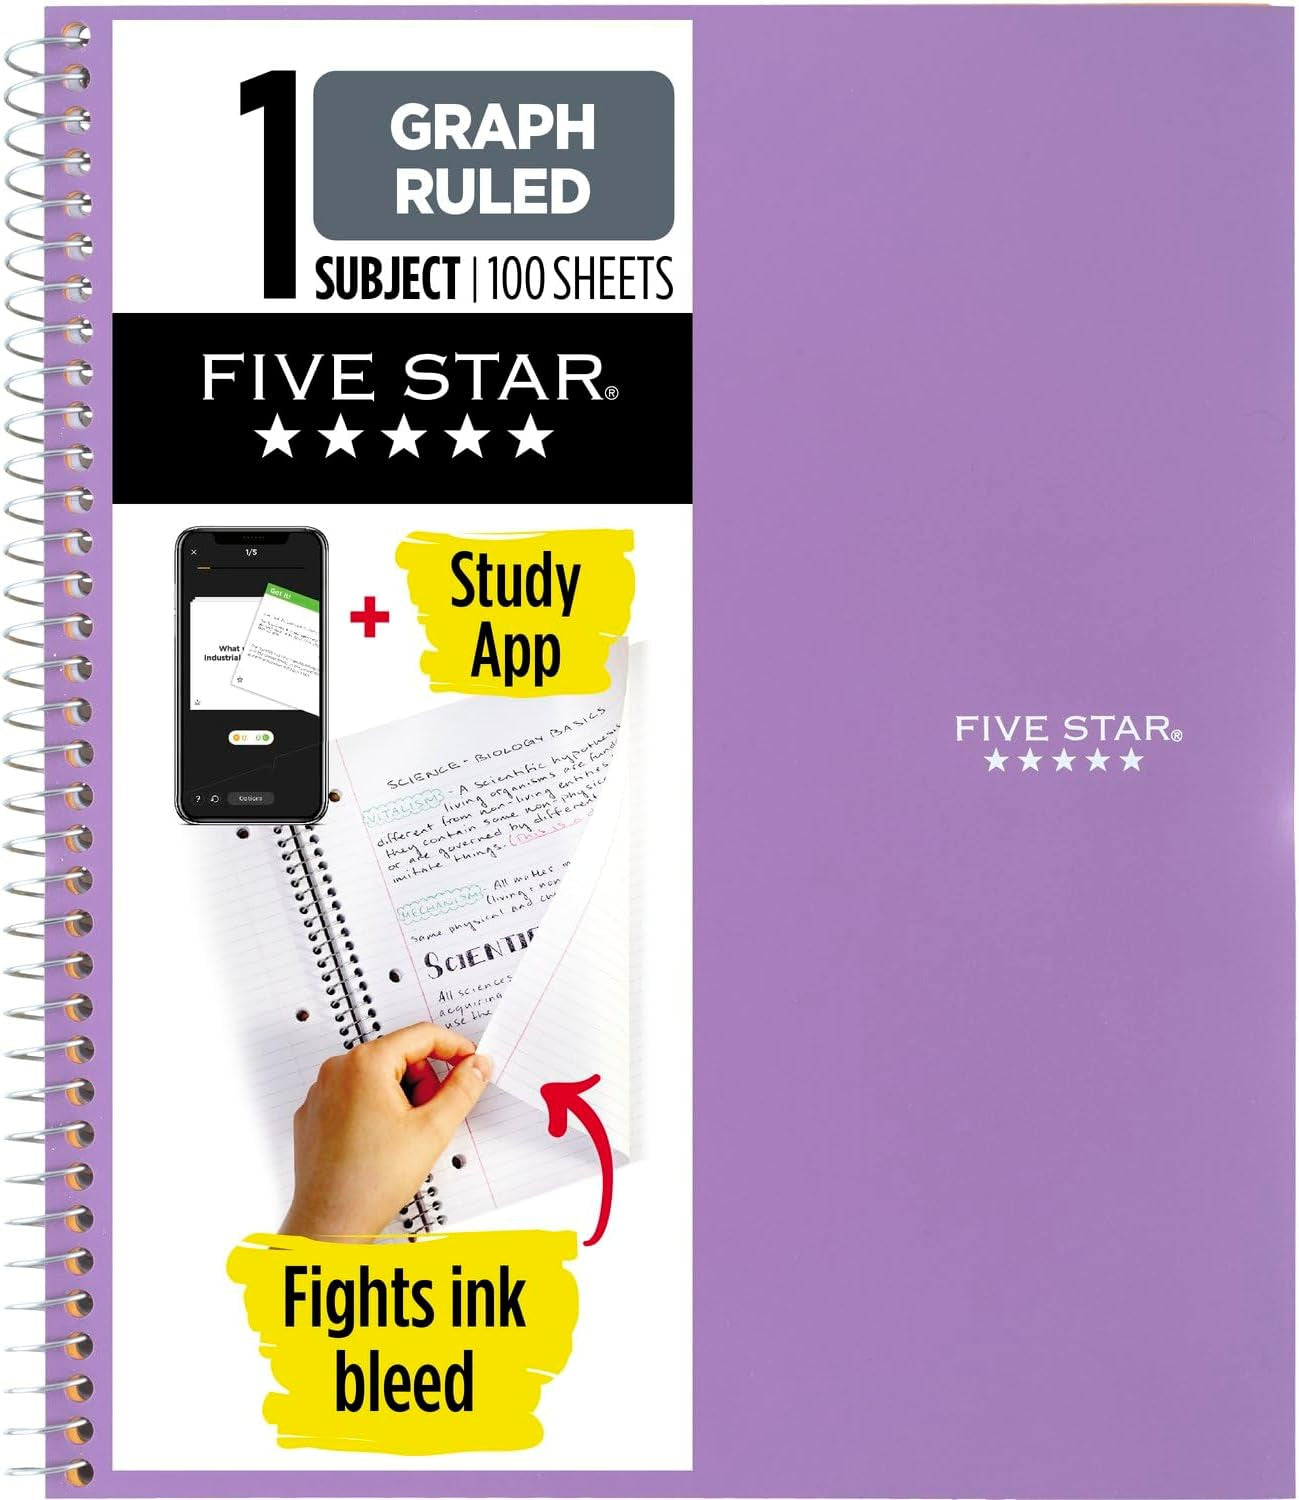 Spiral Notebook + Study App, 1 Subject, Graph Ruled Paper, Fights Ink Bleed, Water Resistant Cover, 8-1/2" X 11", 100 Sheets, Black (73679)